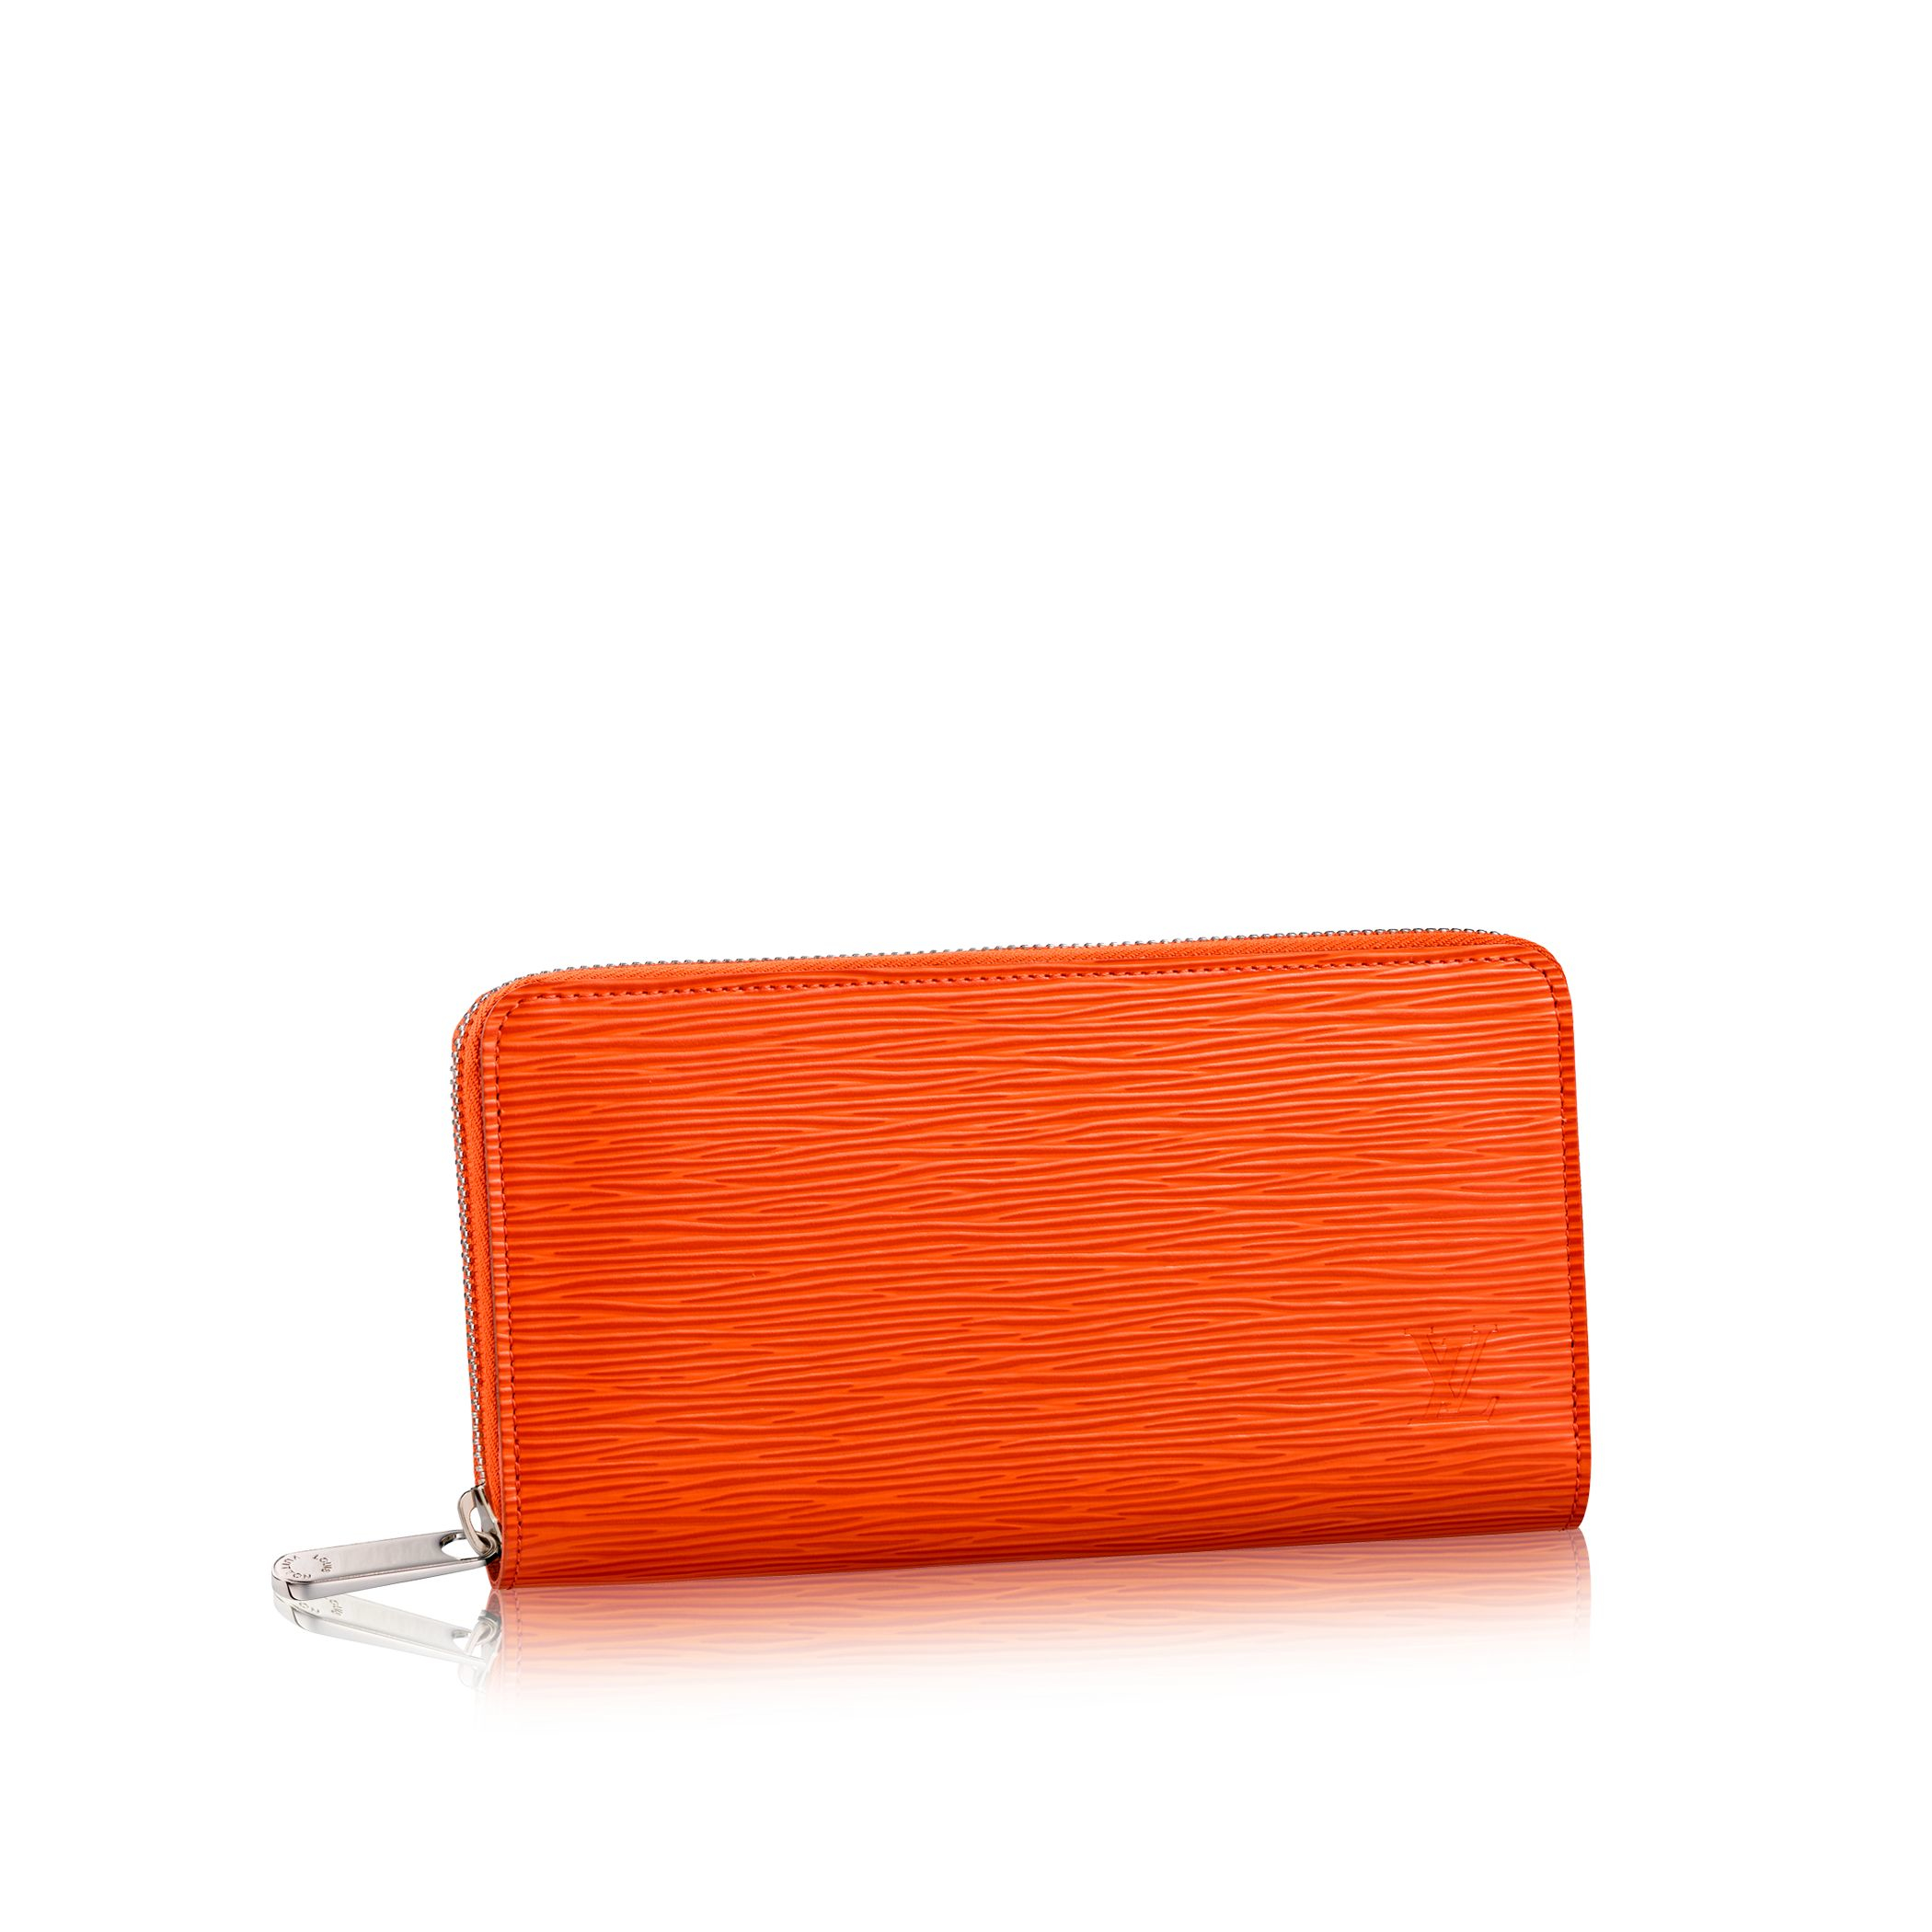 Louis vuitton Zippy Wallet in Red (Chili red) | Lyst